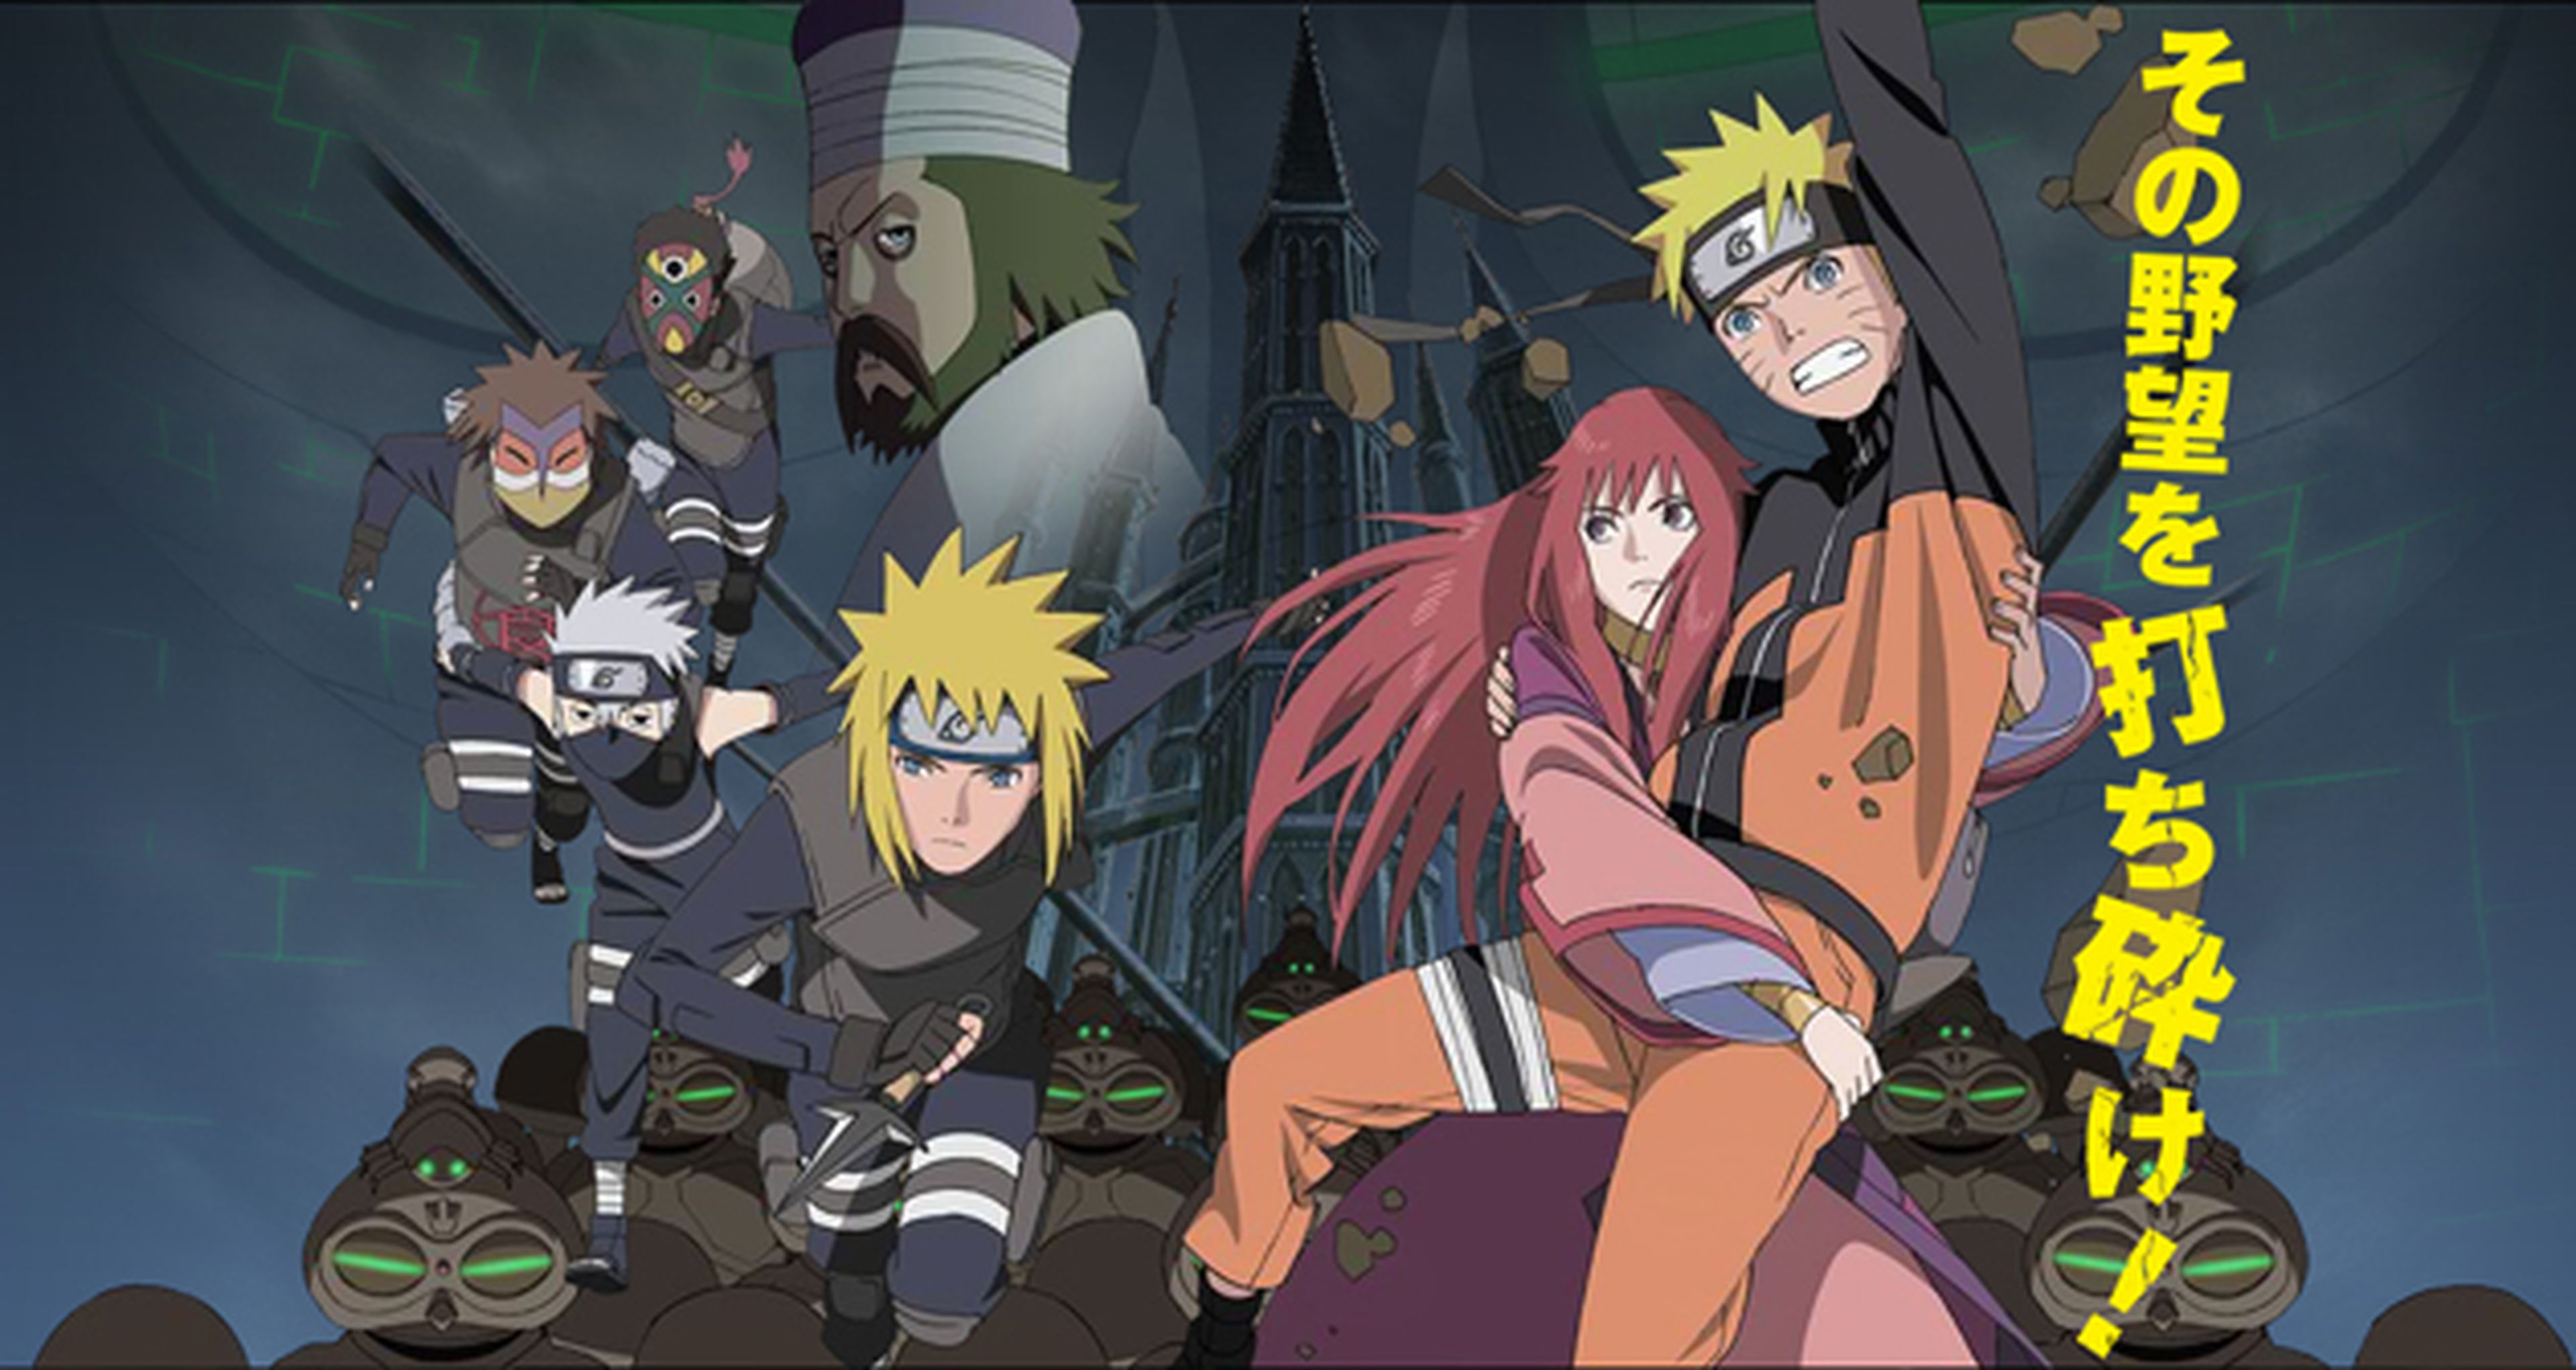 Naruto Shippuuden Movie 4 The Lost Tower (2010) Watch HD - Vídeo Dailymotion